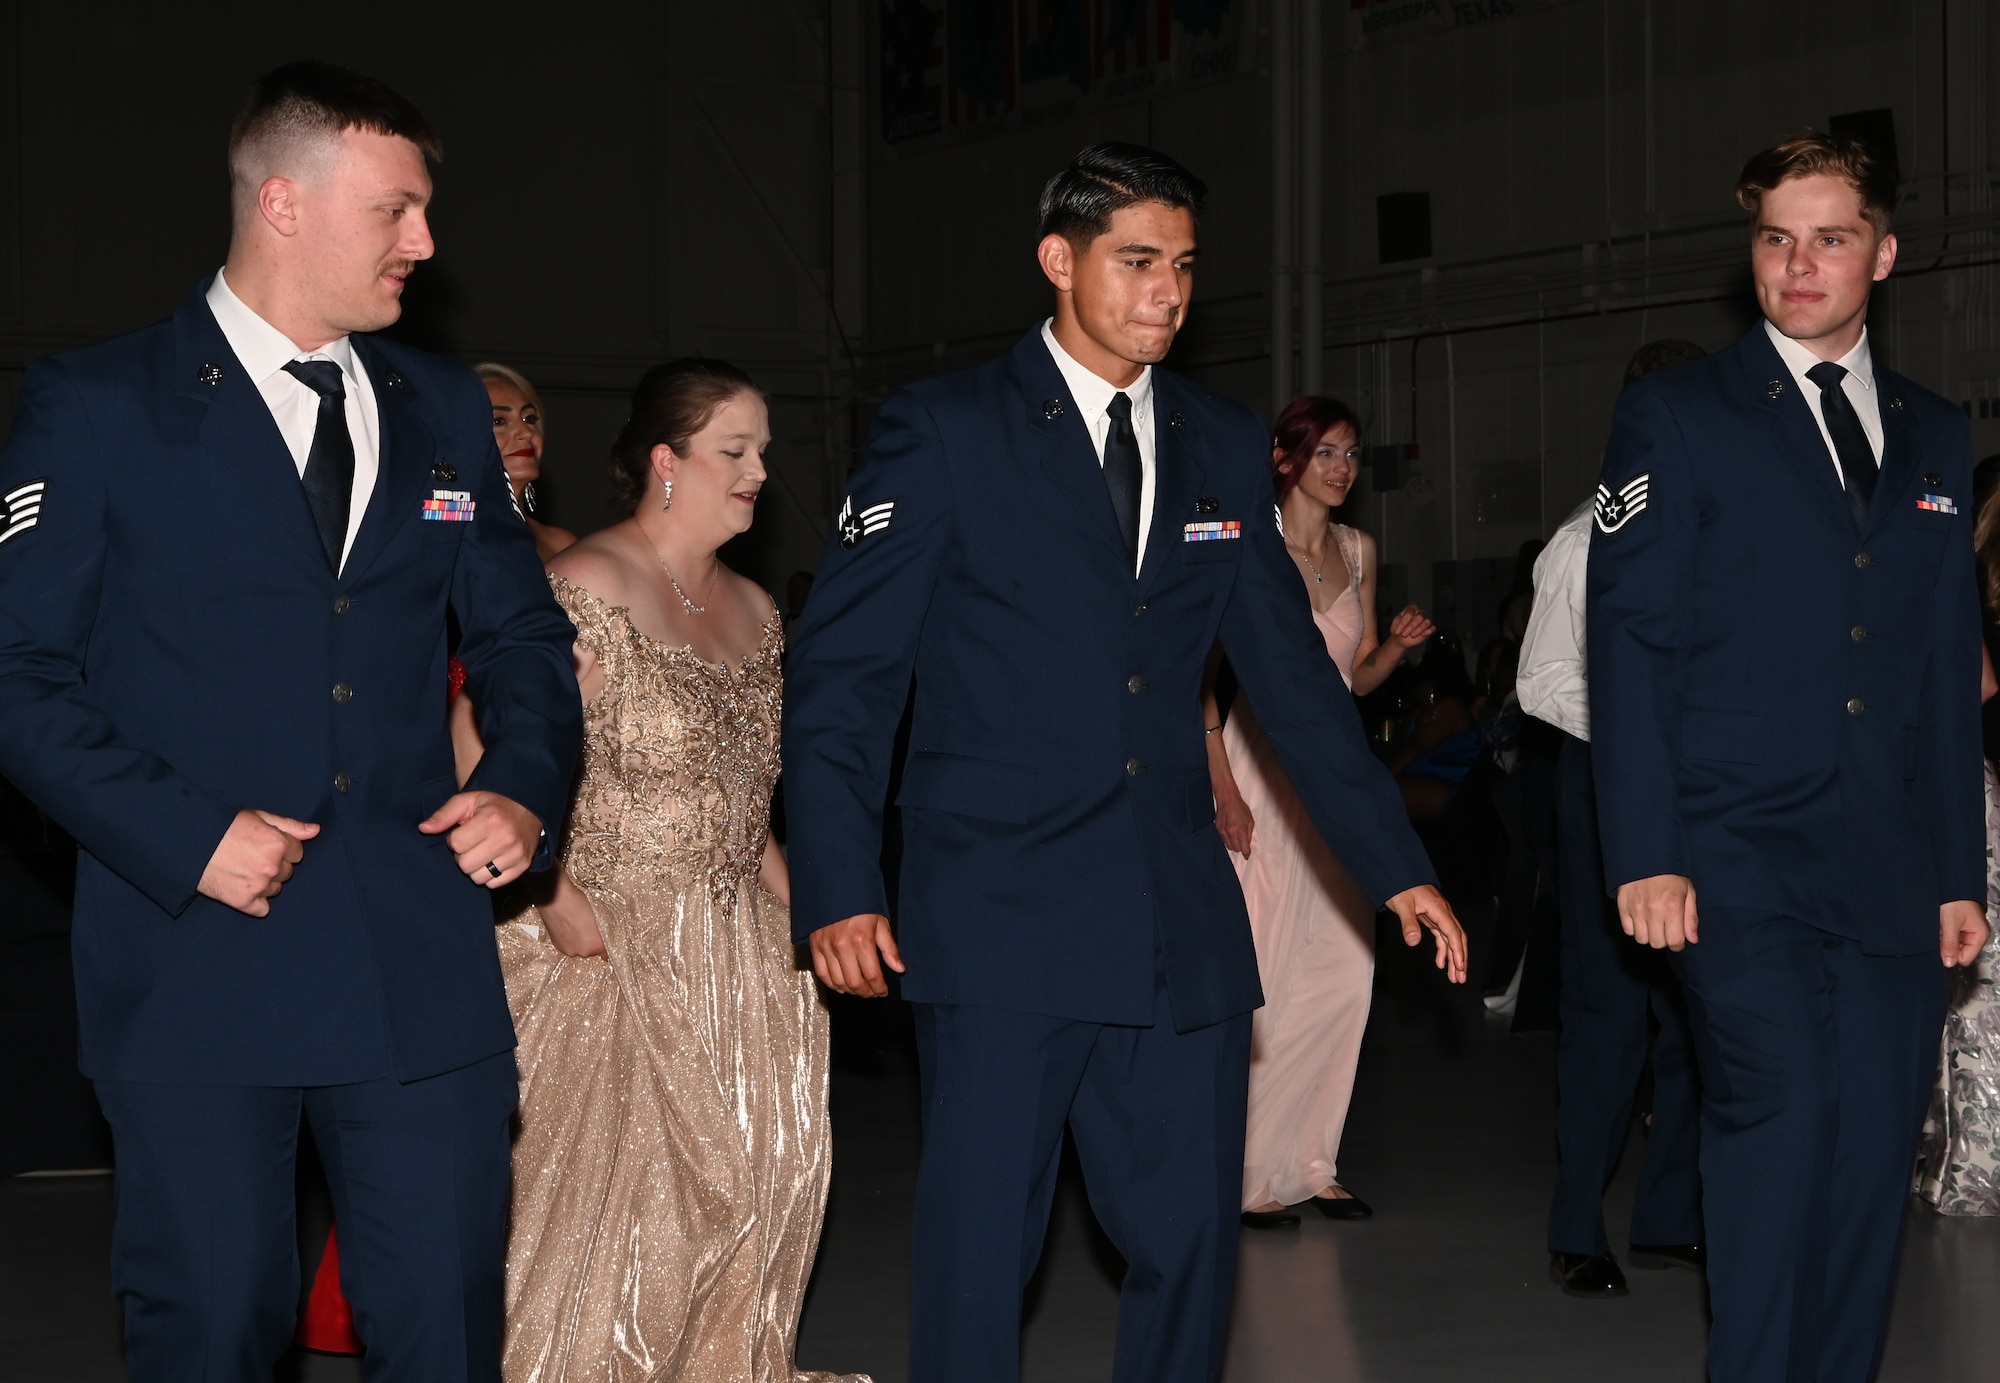 Airmen dance at the Air Force Ball at Whiteman Air Force Base, Missouri, September 16, 2022. The AF Ball not only celebrates the 75th anniversary of the Air Force being established, but also the 80th anniversary of Whiteman AFB being established. (U.S. Air Force photo by Airman 1st Class Joseph Garcia)